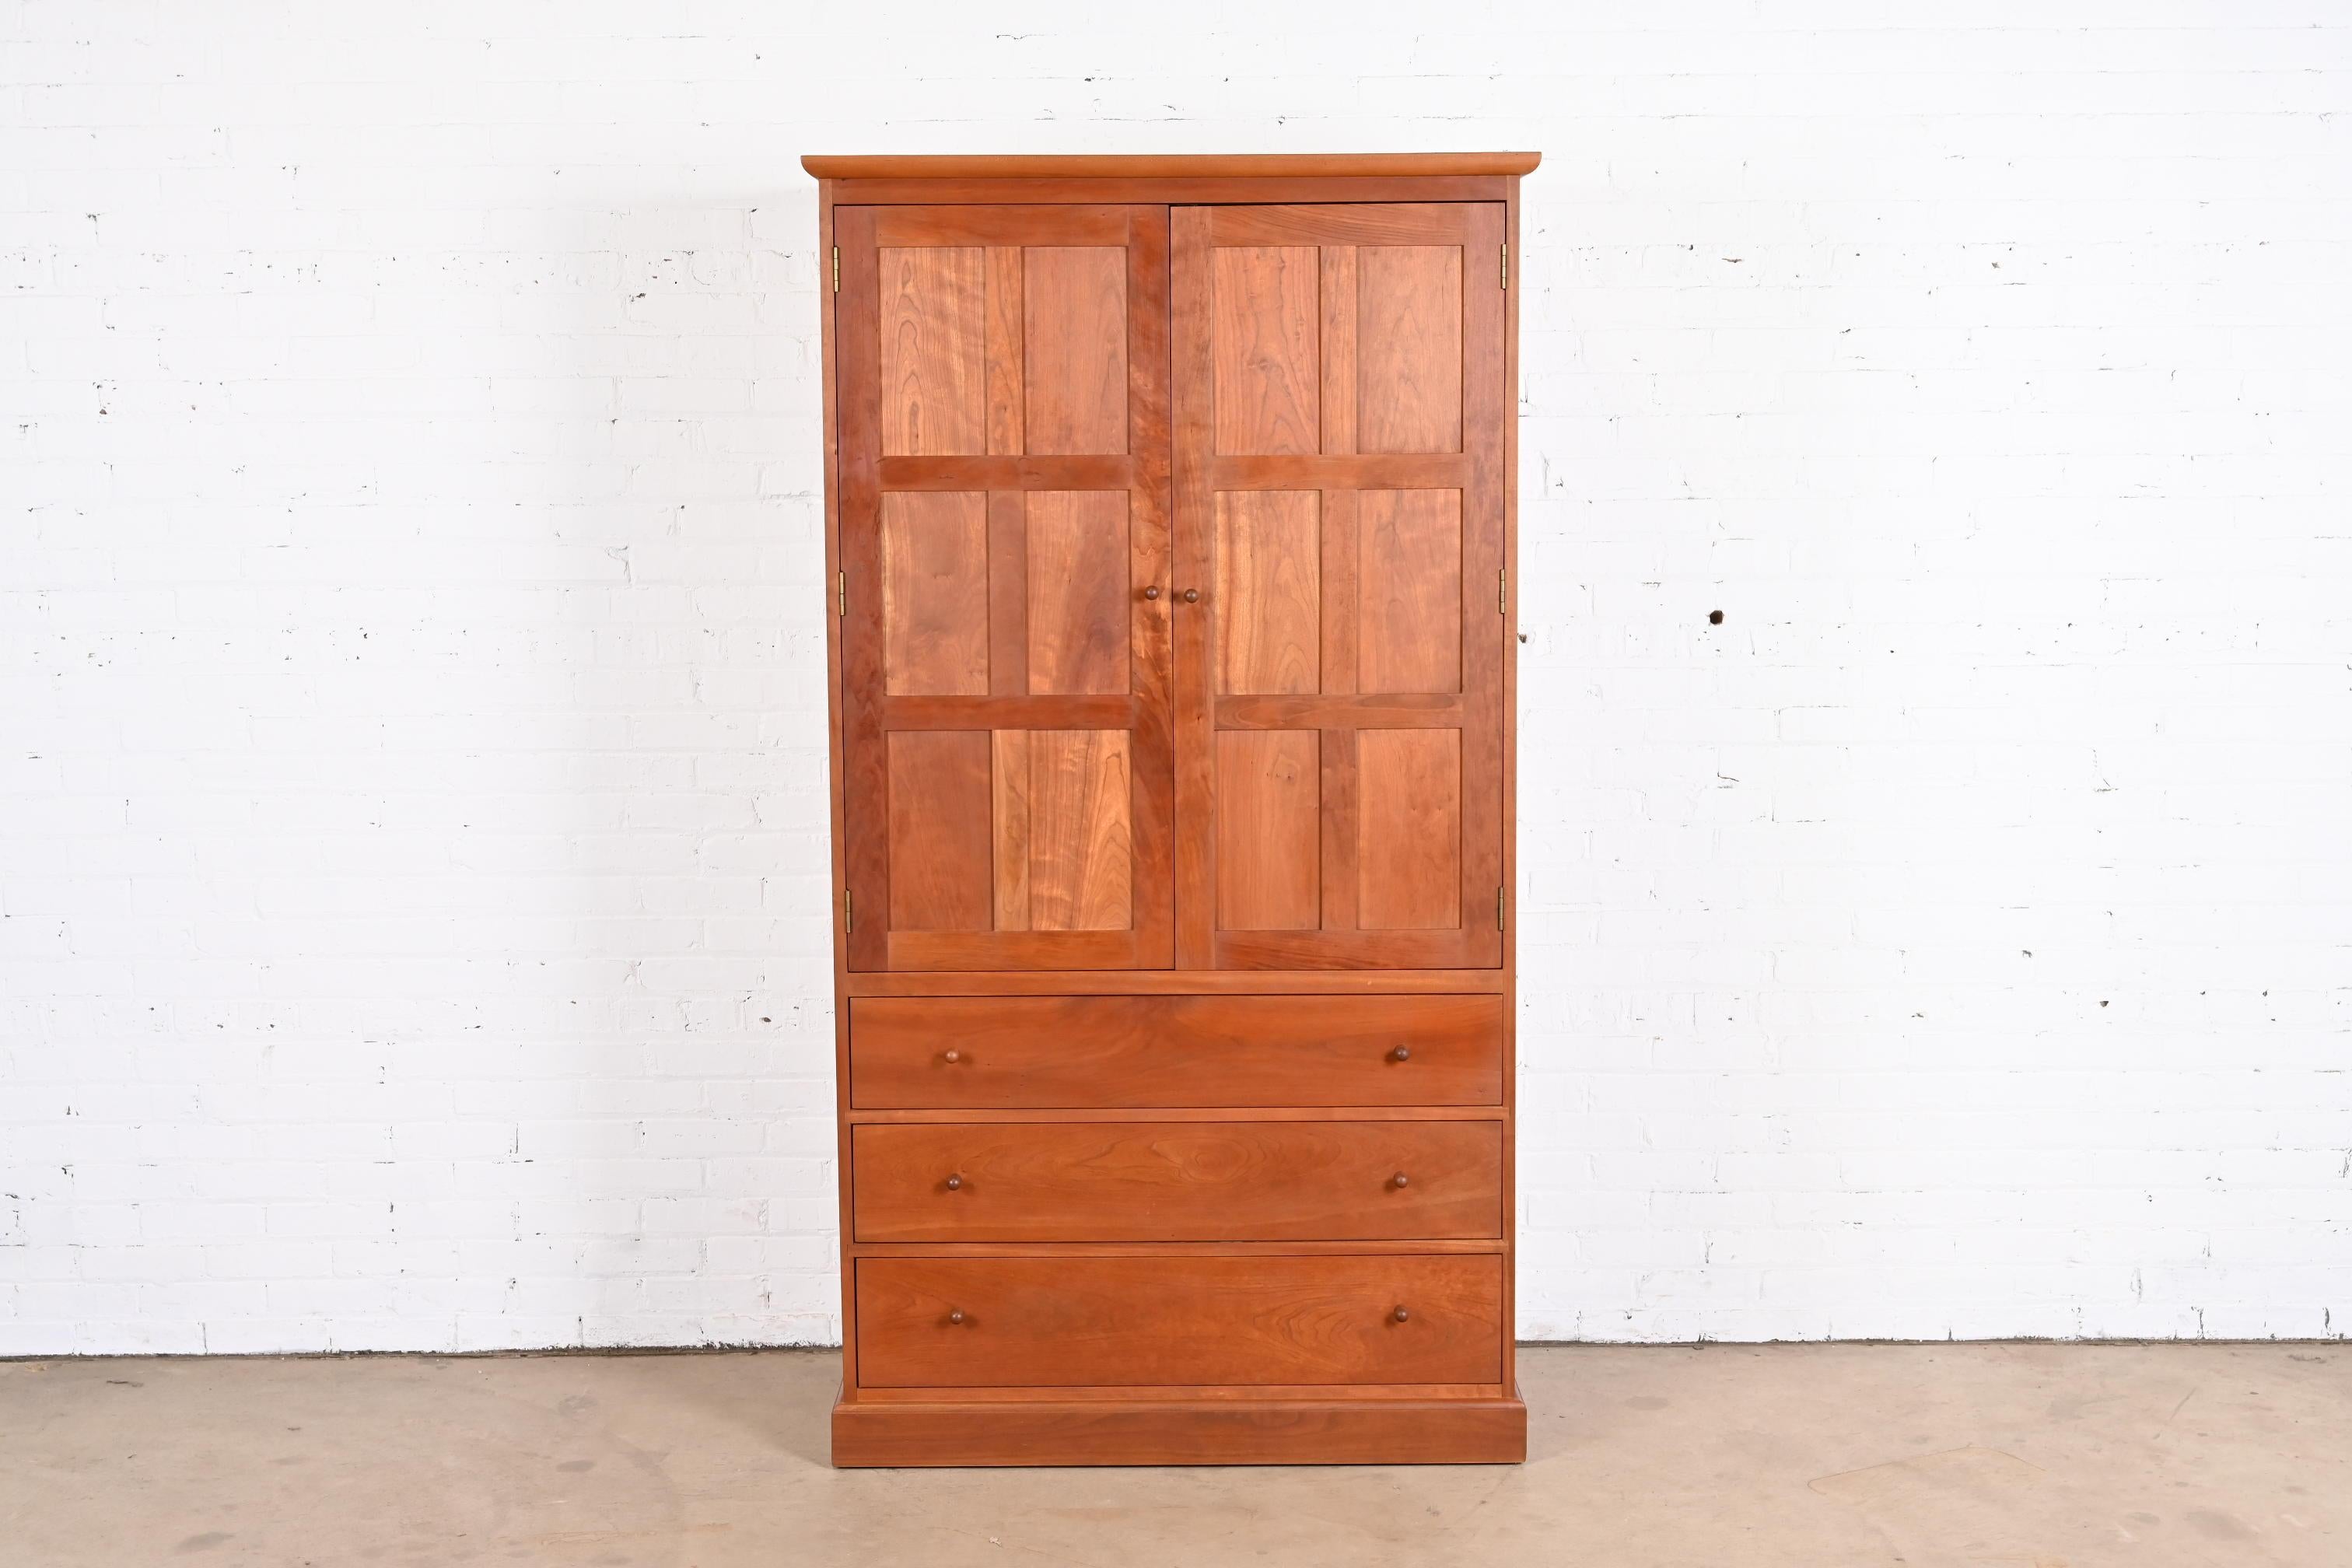 An exceptional Arts & Crafts or Shaker style solid cherry wood armoire dresser or gentleman's chest

By L. & J.G. Stickley

USA, Late 20th Century

Measures: 42